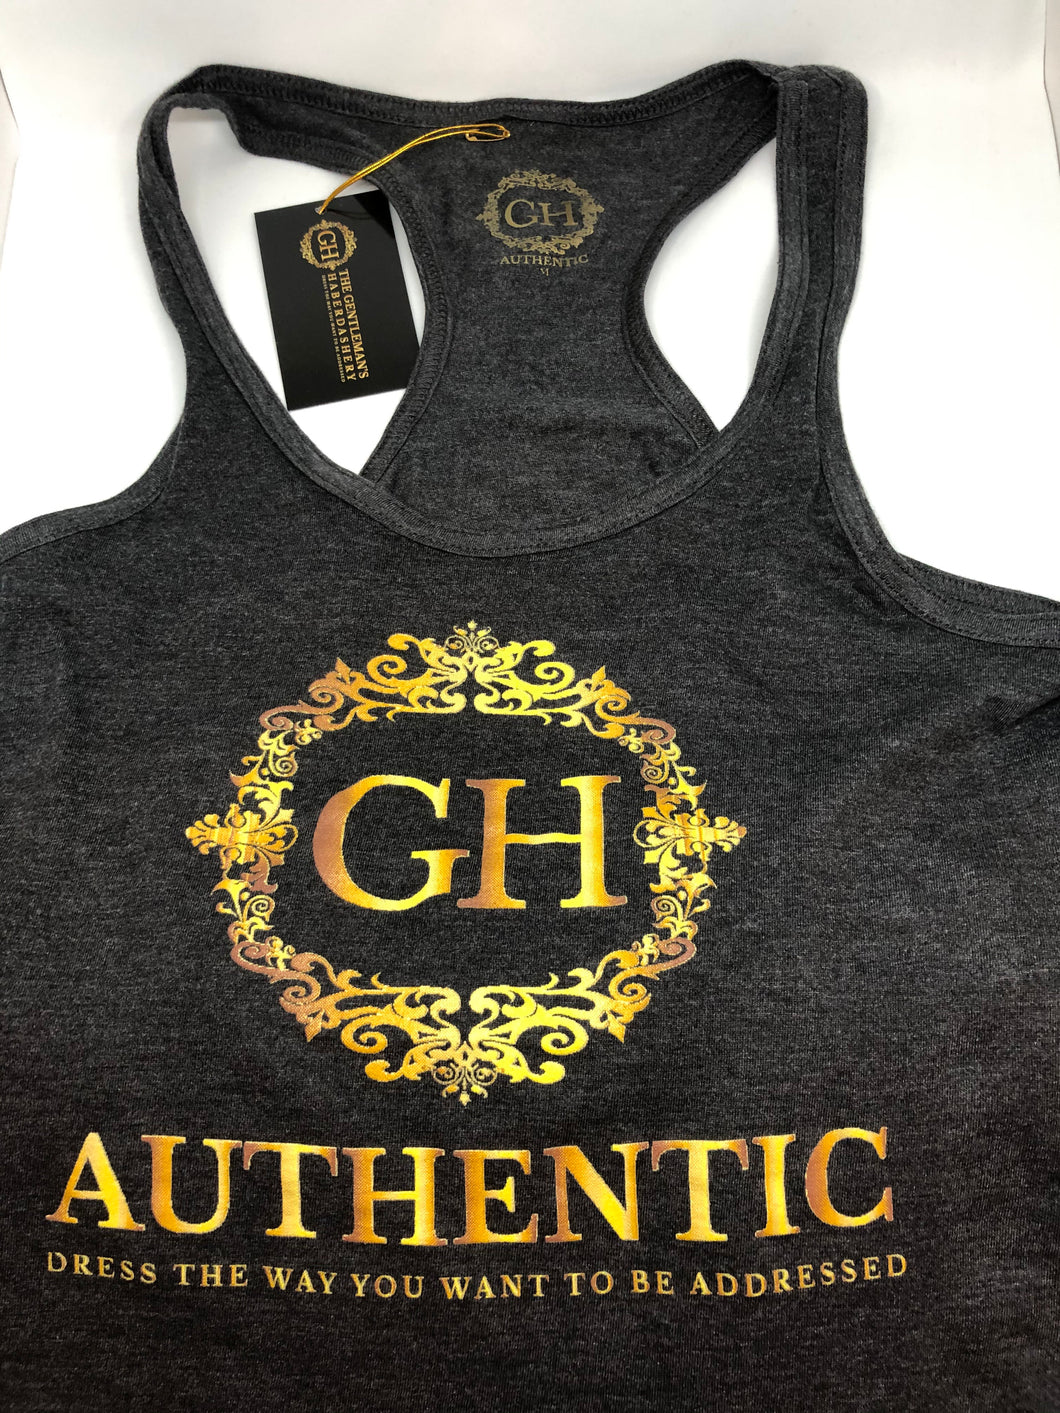 GH Authentic Women's Charcole Grey Tank Top